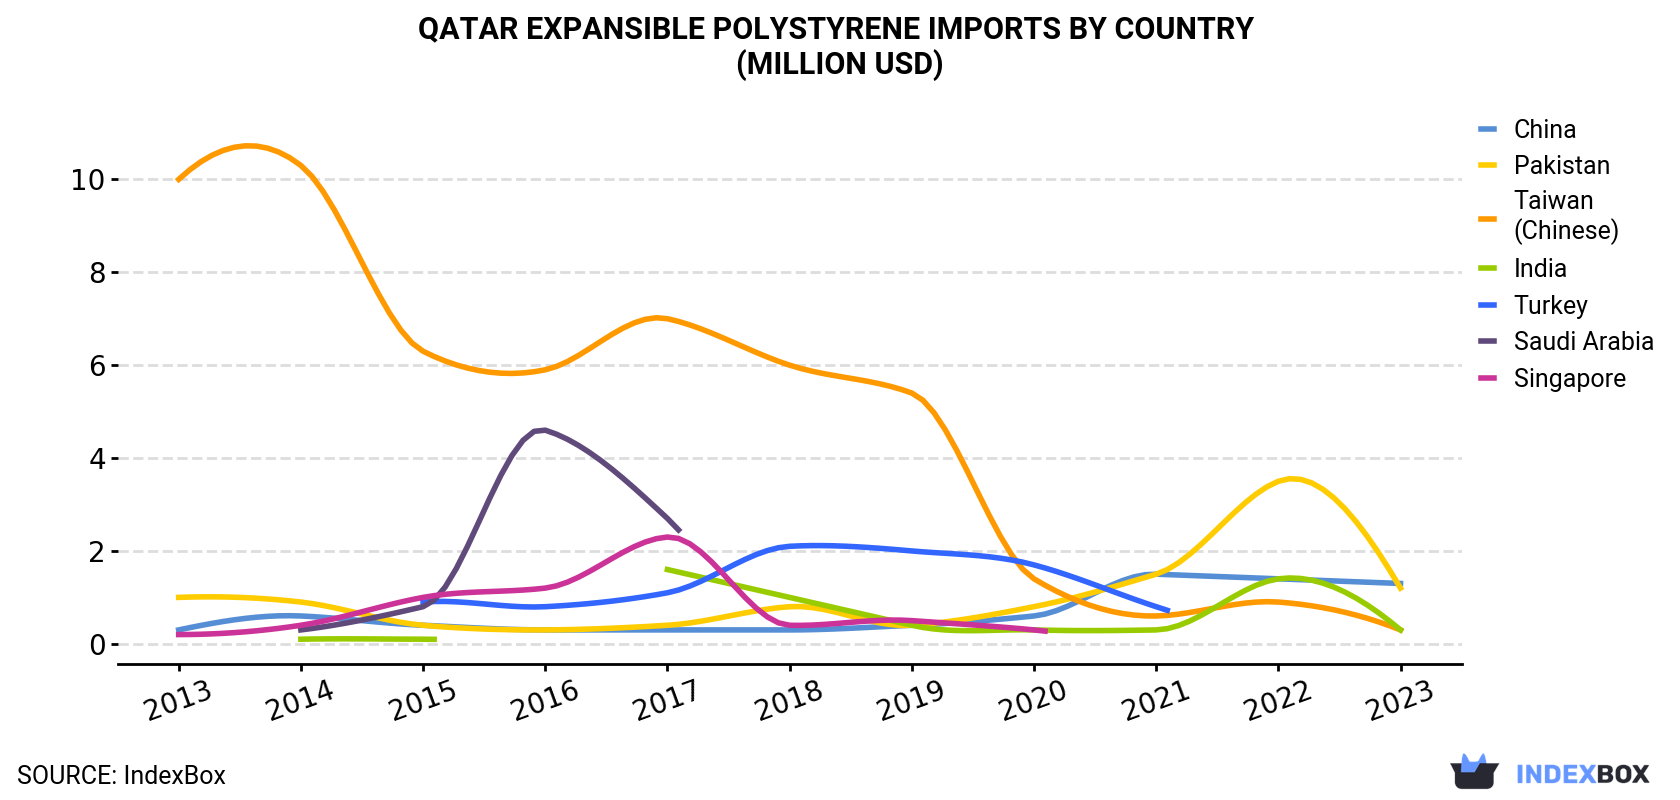 Qatar Expansible Polystyrene Imports By Country (Million USD)